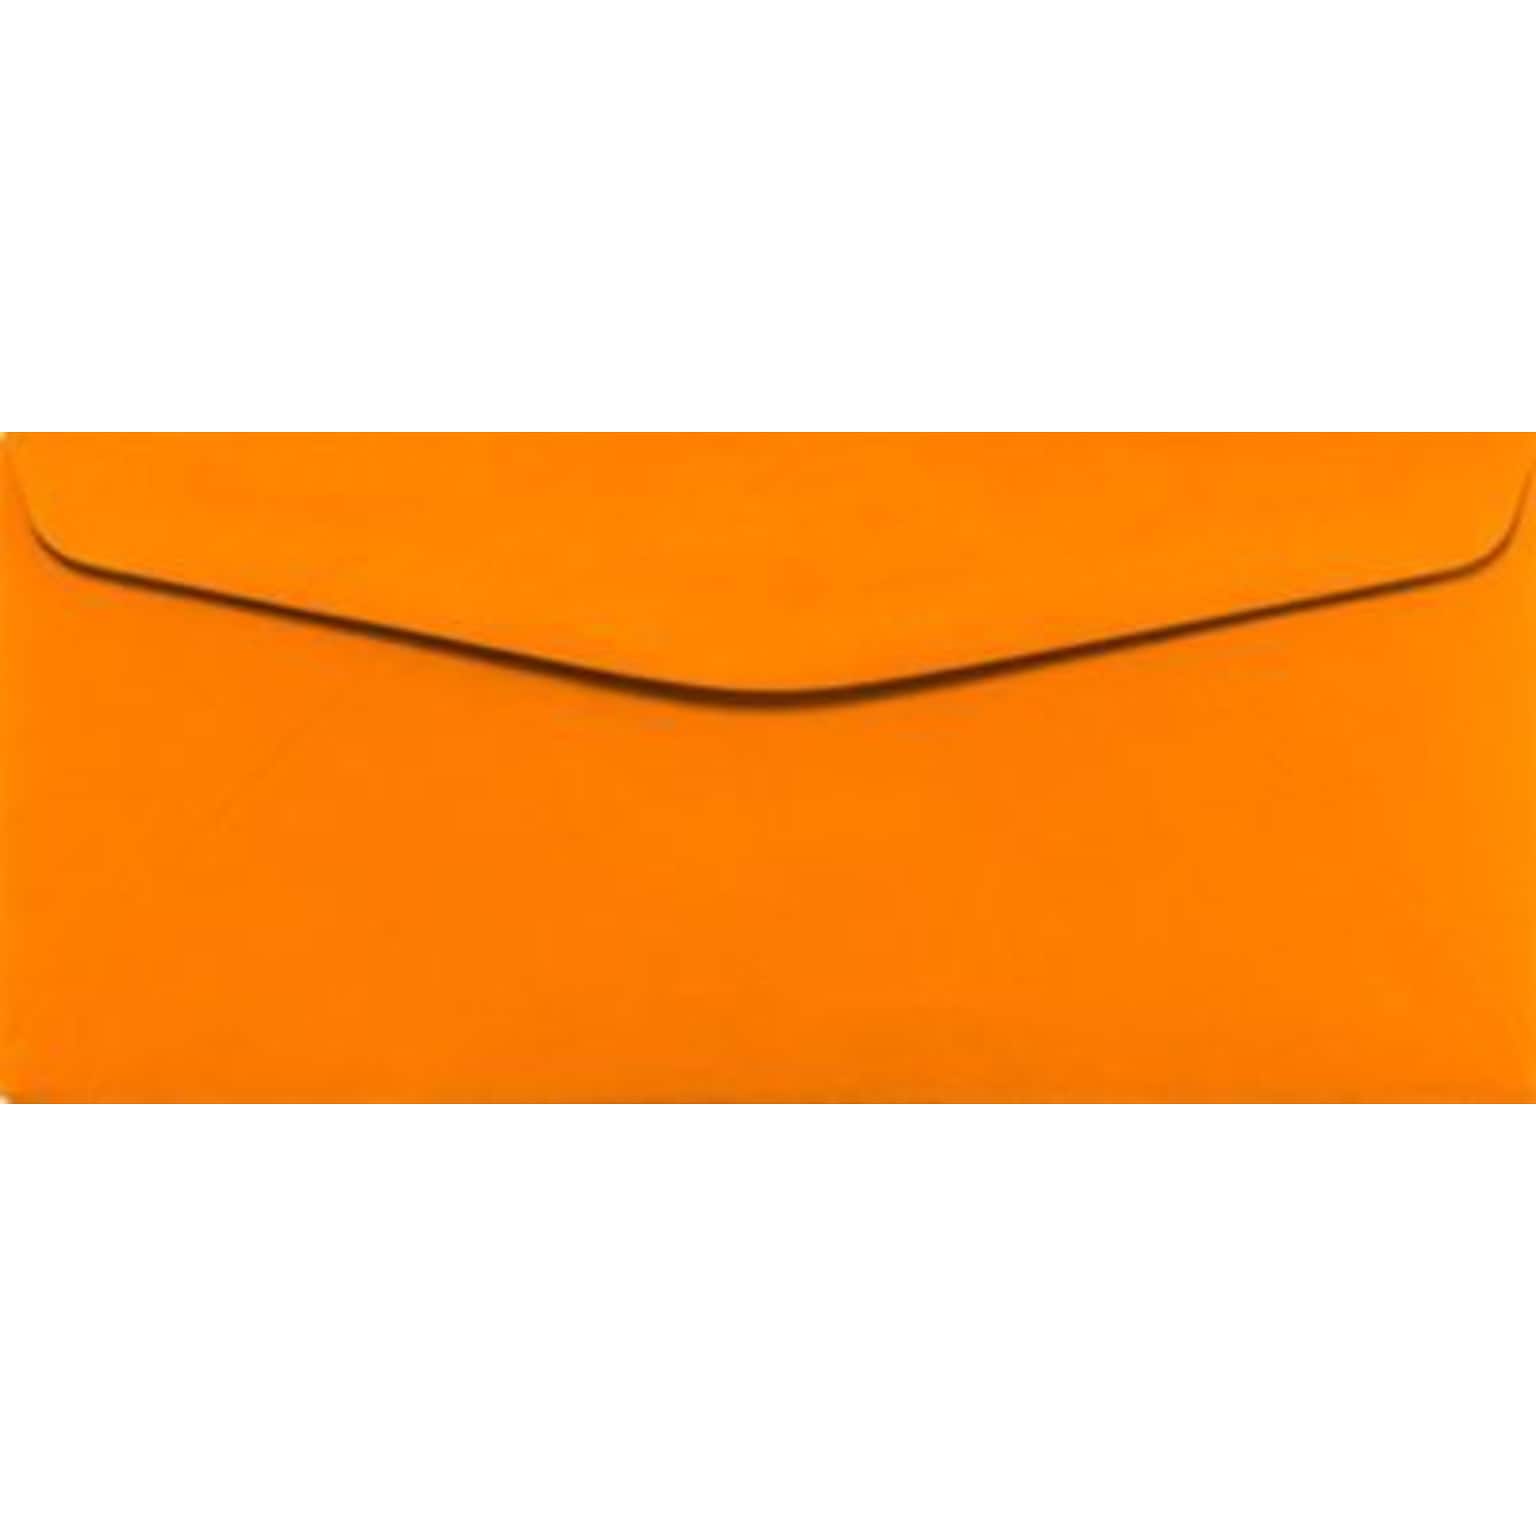 LUX #9 Business Envelope, 3 7/8 x 8 7/8, Electric Orange, 250/Pack (WS-2040-250)